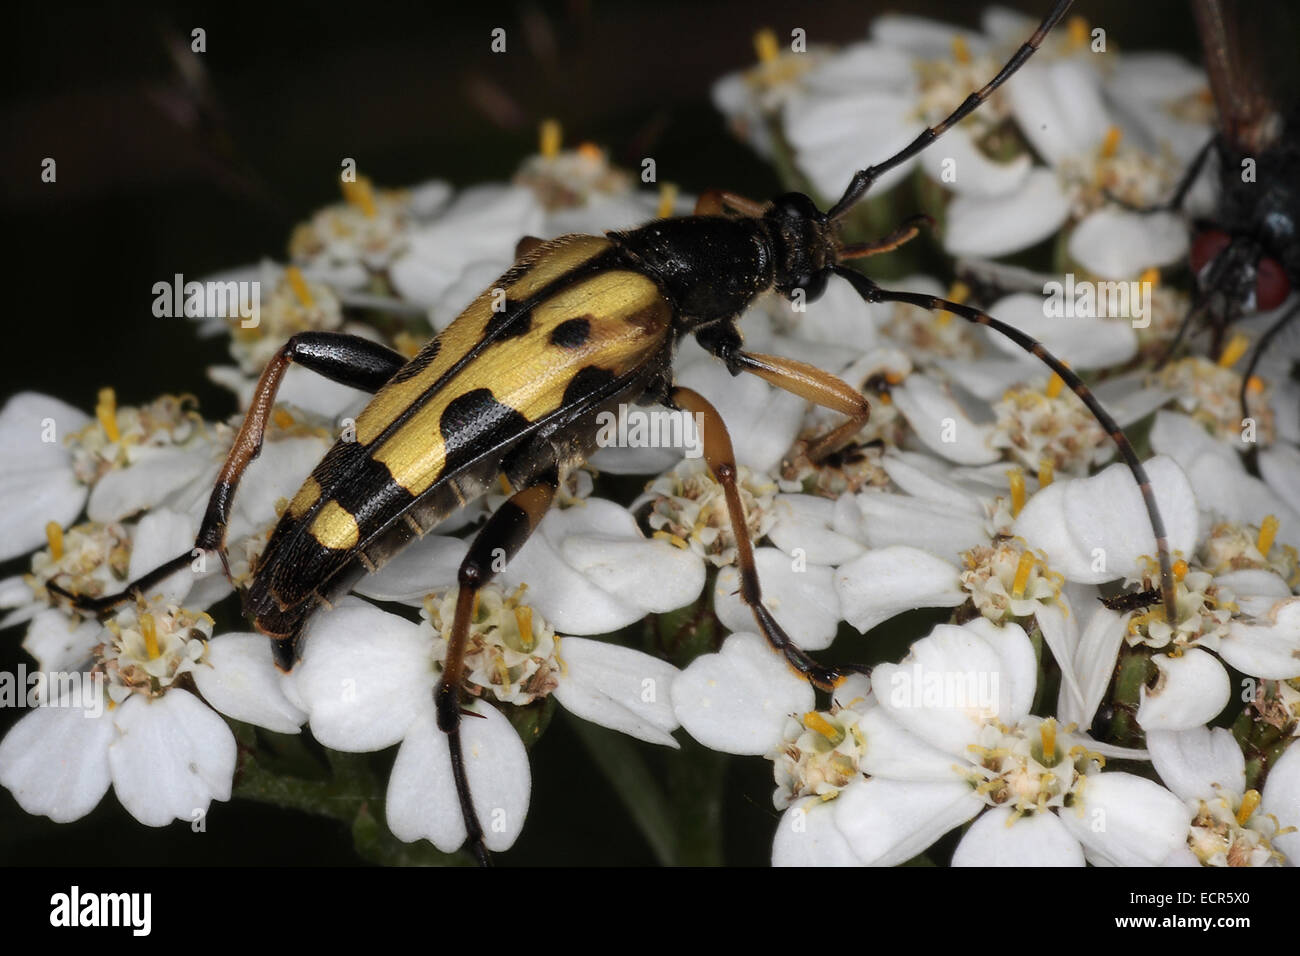 The beetle Rutpela maculata (Strangalia maculata) is built very narrow and has yellow and black striped on his sensors. The elytra are striped yellow and black. Photo: Klaus Nowottnick Date: July 16, 2009 Stock Photo